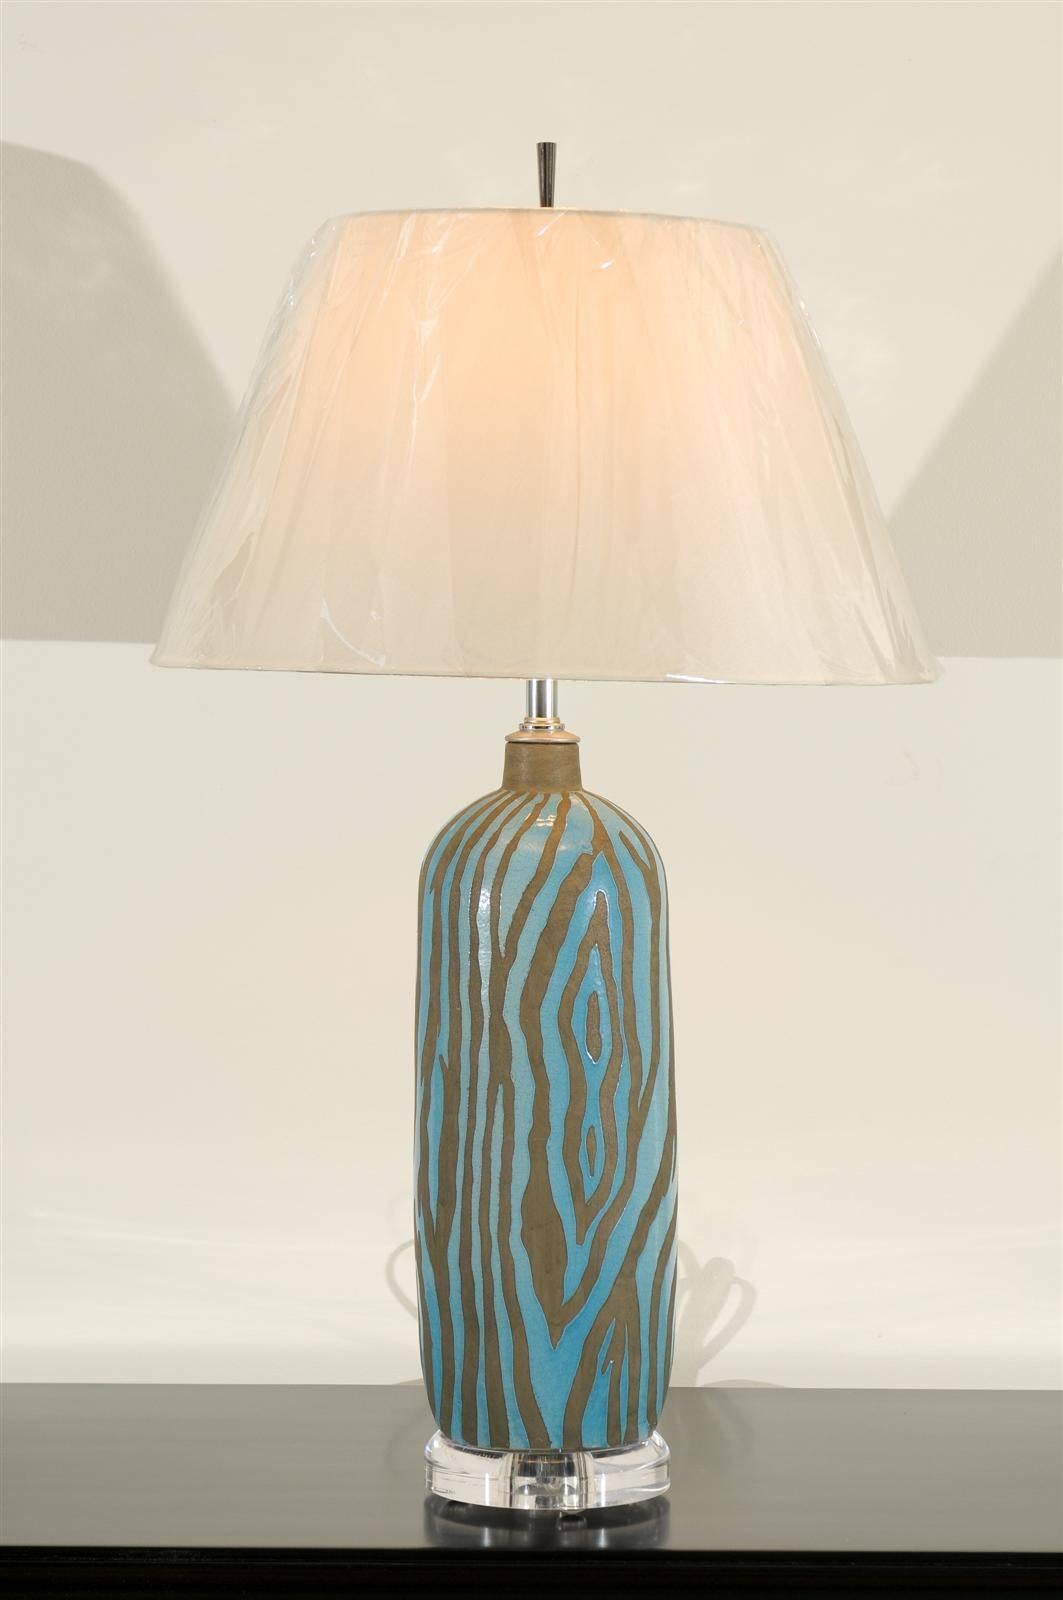 A stylish pair of ceramic vessels as custom lamps. Wonderful graphic zebra print with nickel accents on a thick Lucite museum display base. Stunning jewelry! Excellent restored condition. Wired using clear cord; new nickel three-way sockets with